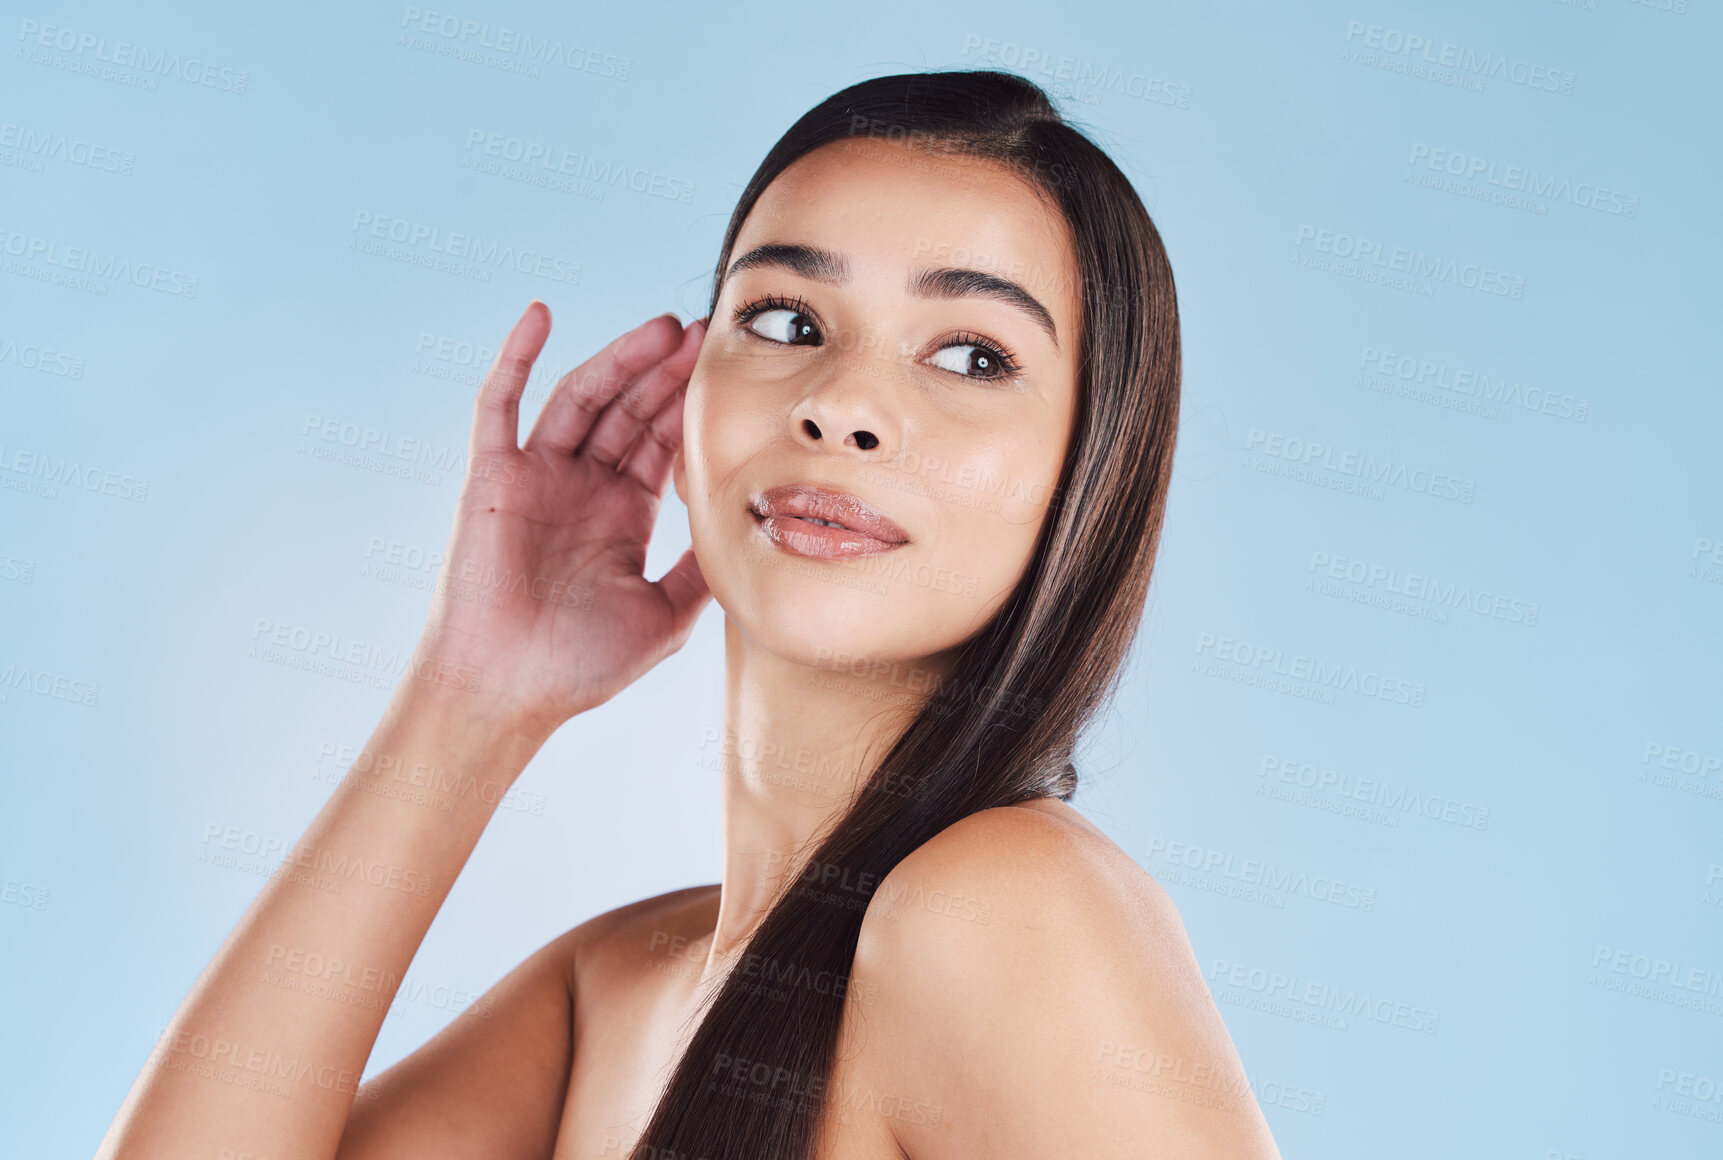 Buy stock photo One beautiful young hispanic woman with healthy skin and sleek long hair posing against a blue studio background. Mixed race model with flawless complexion and natural beauty